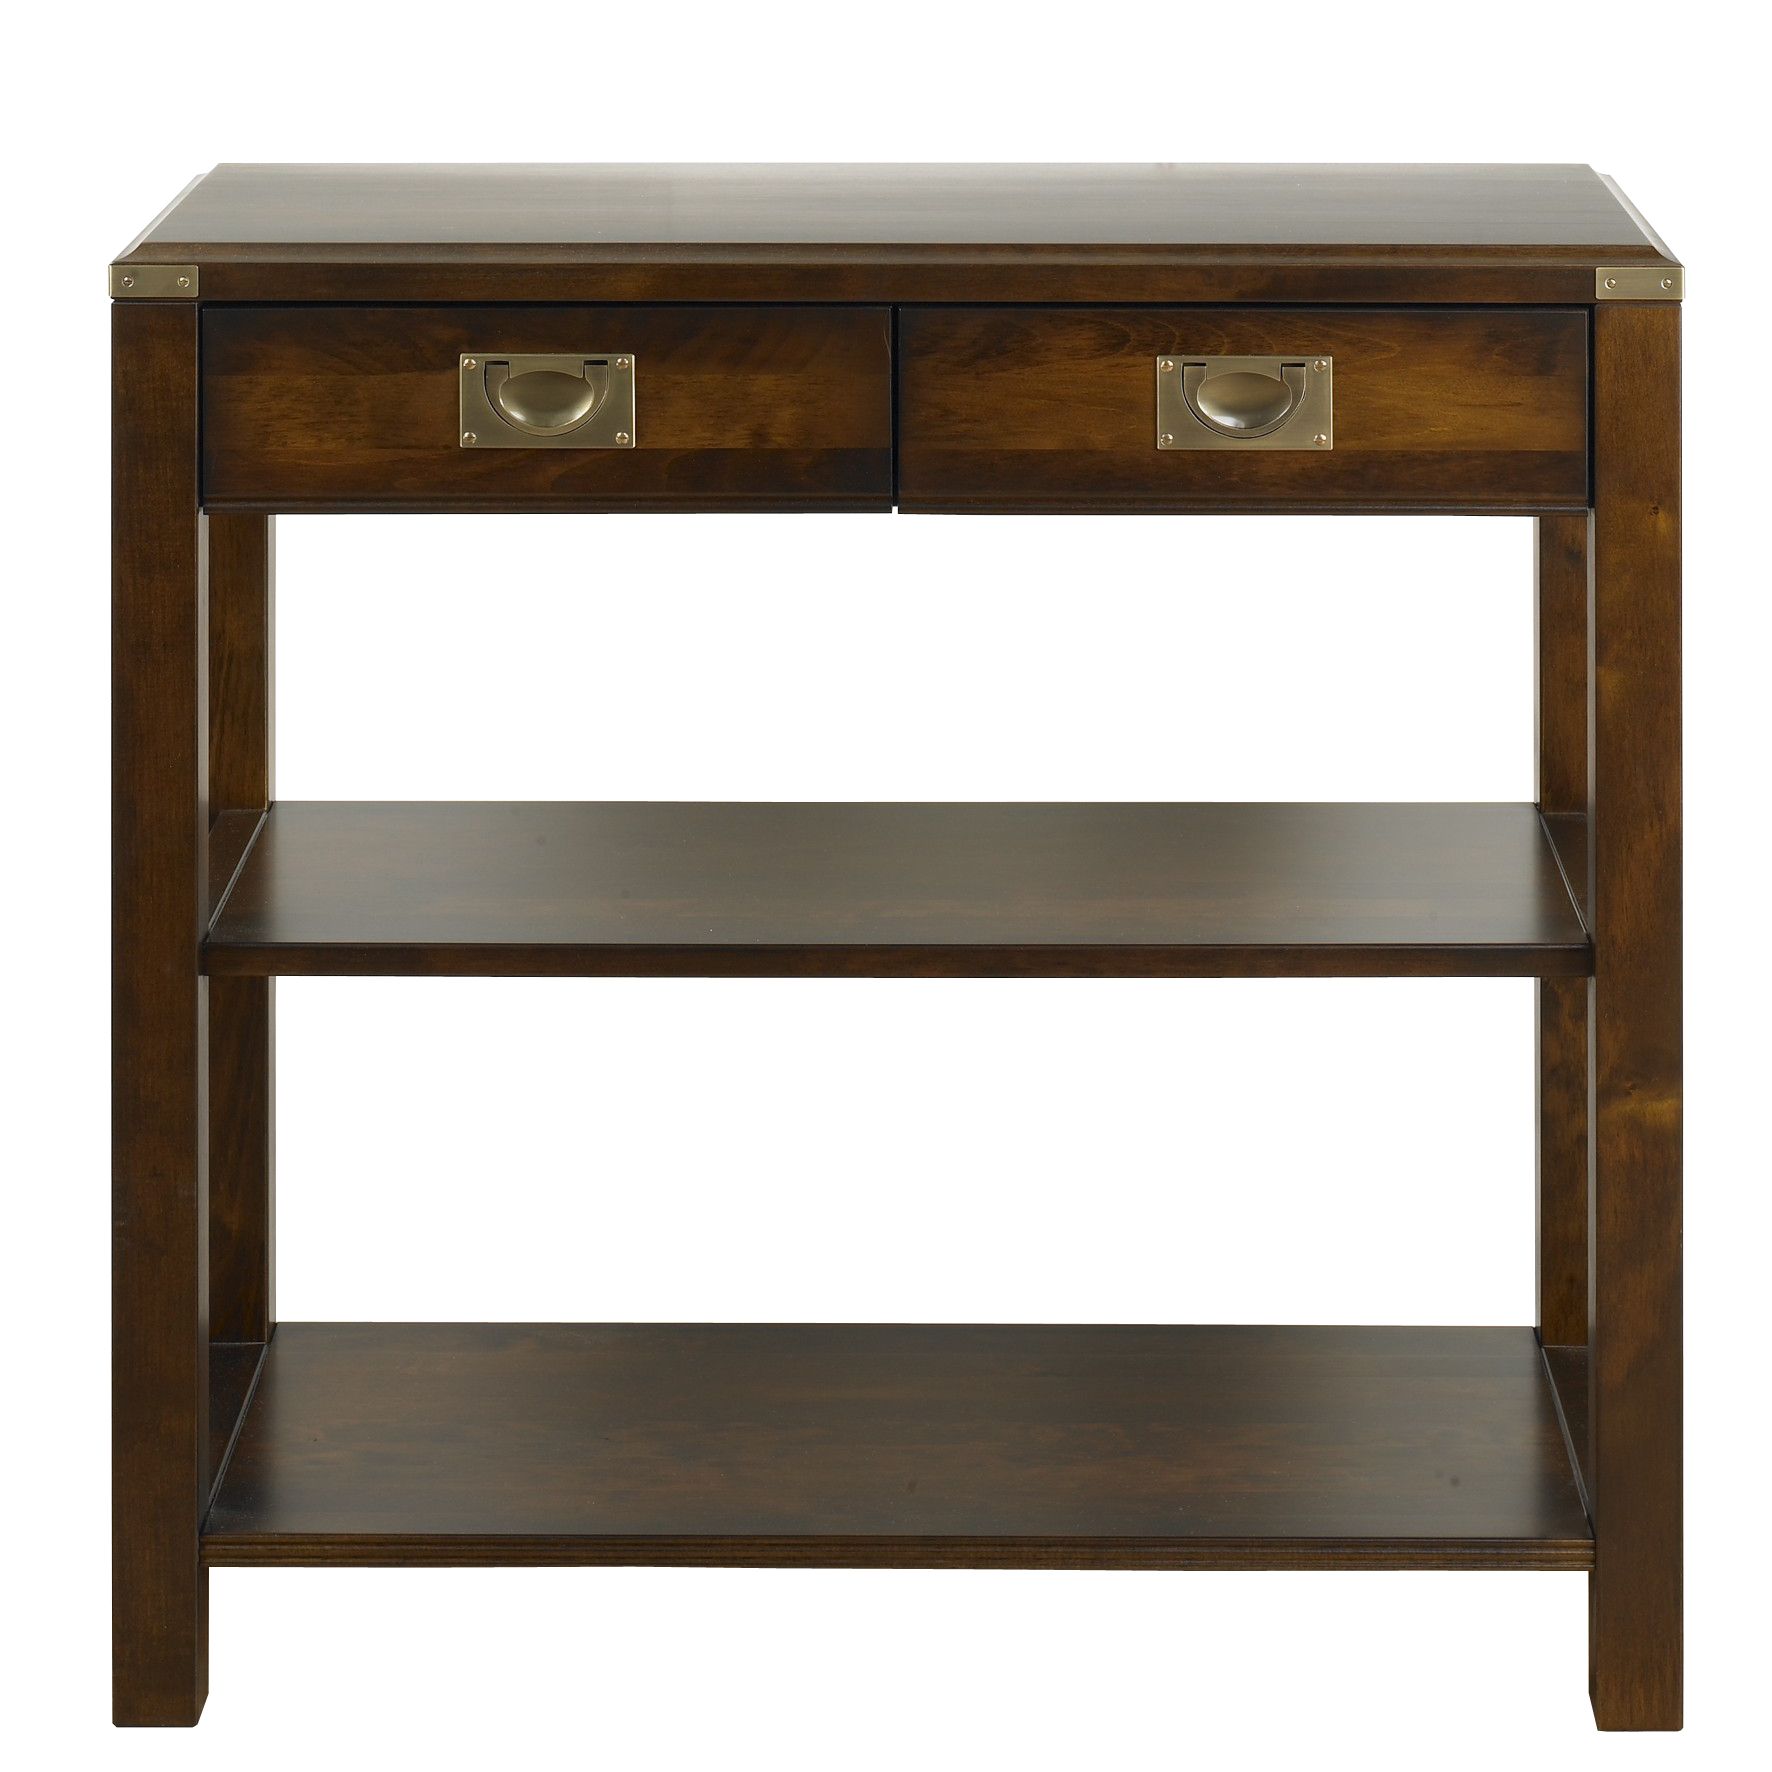 Apsley Console Table